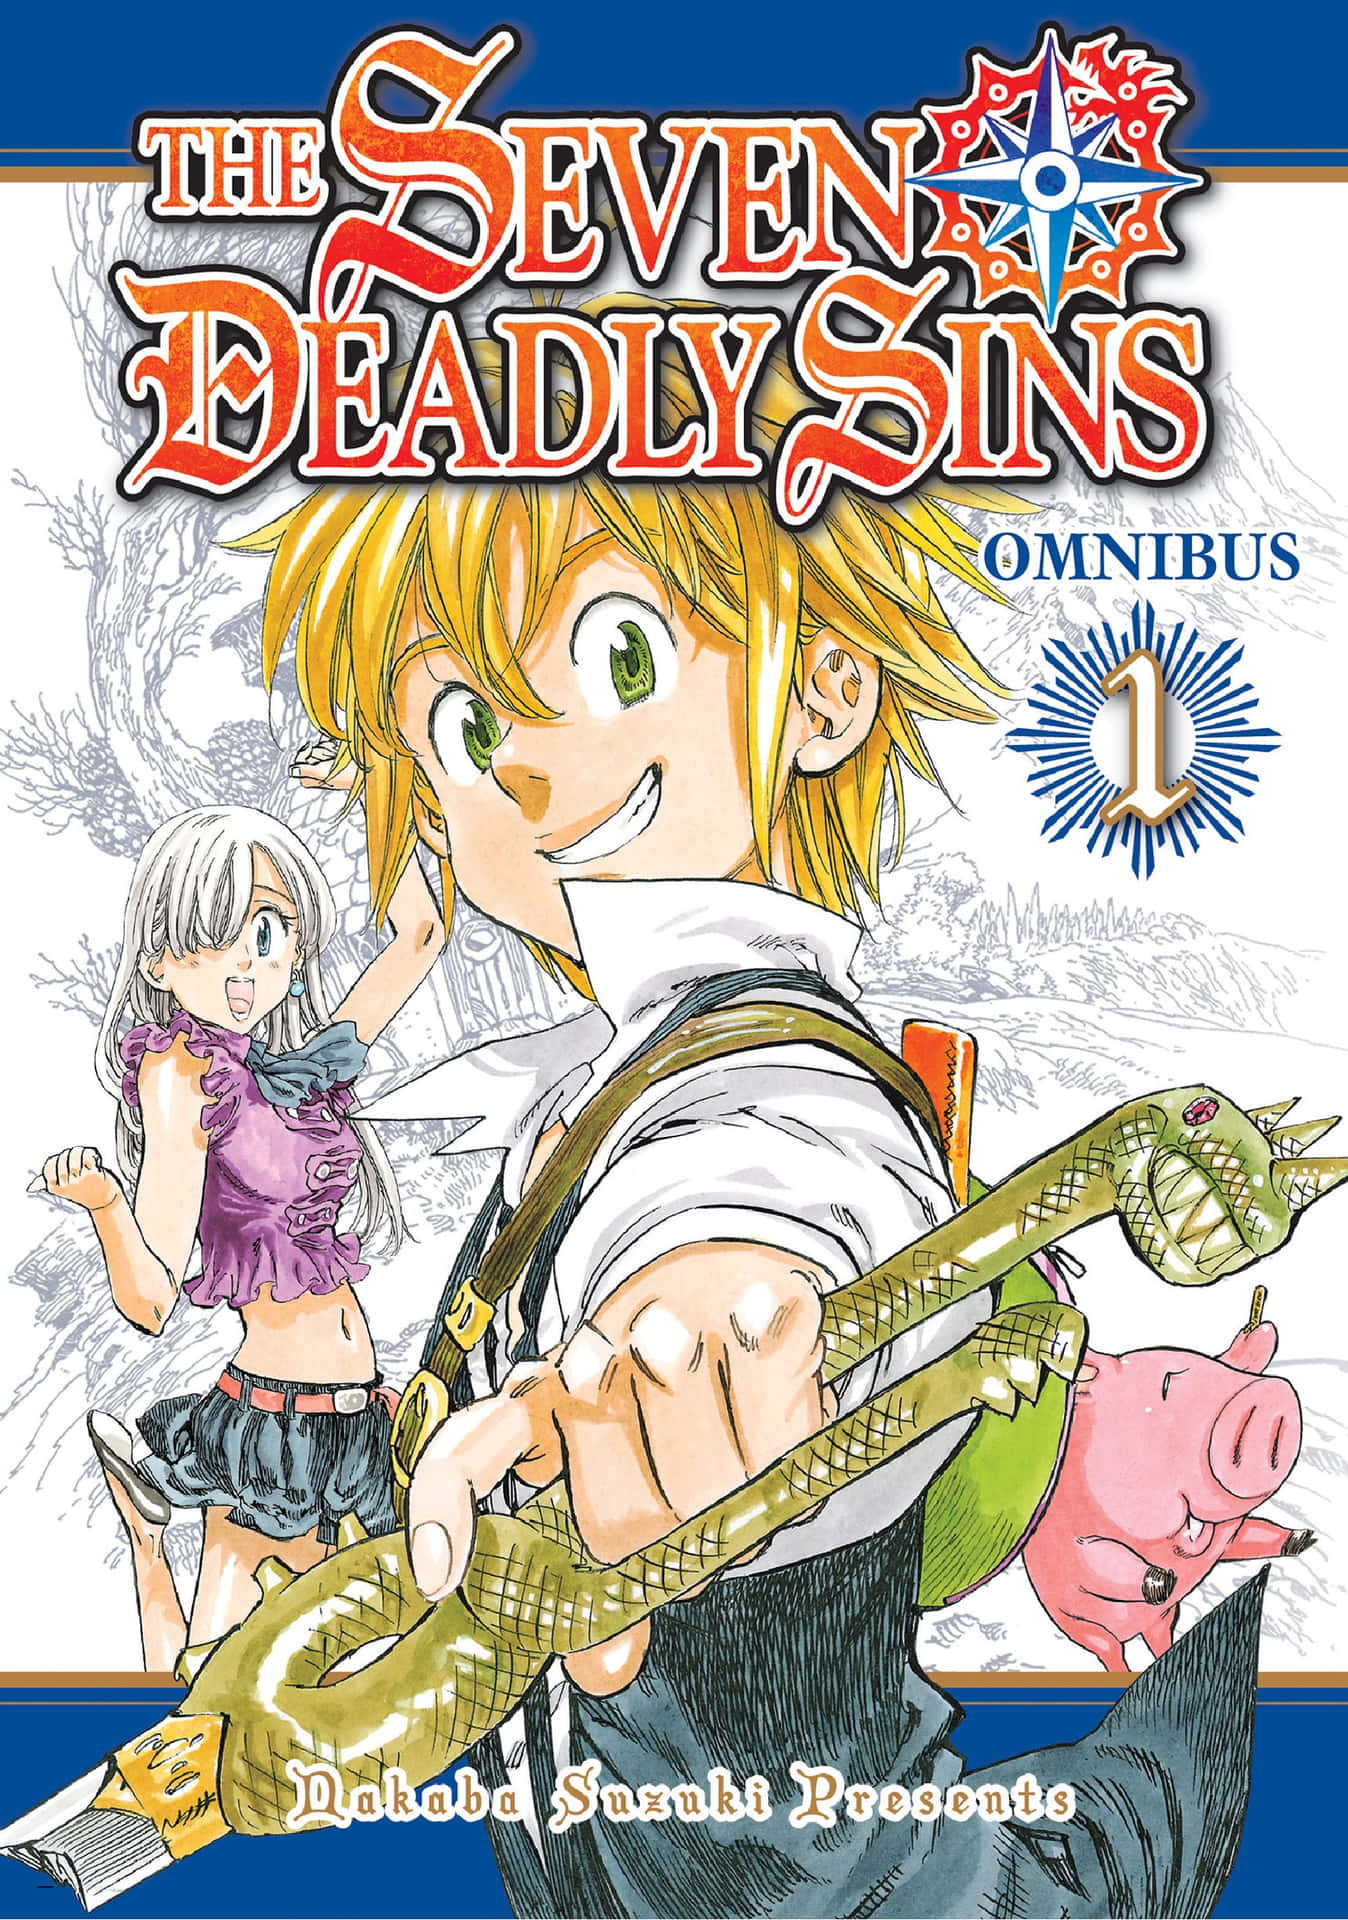 Surrender to the Seven Deadly Sins Wallpaper